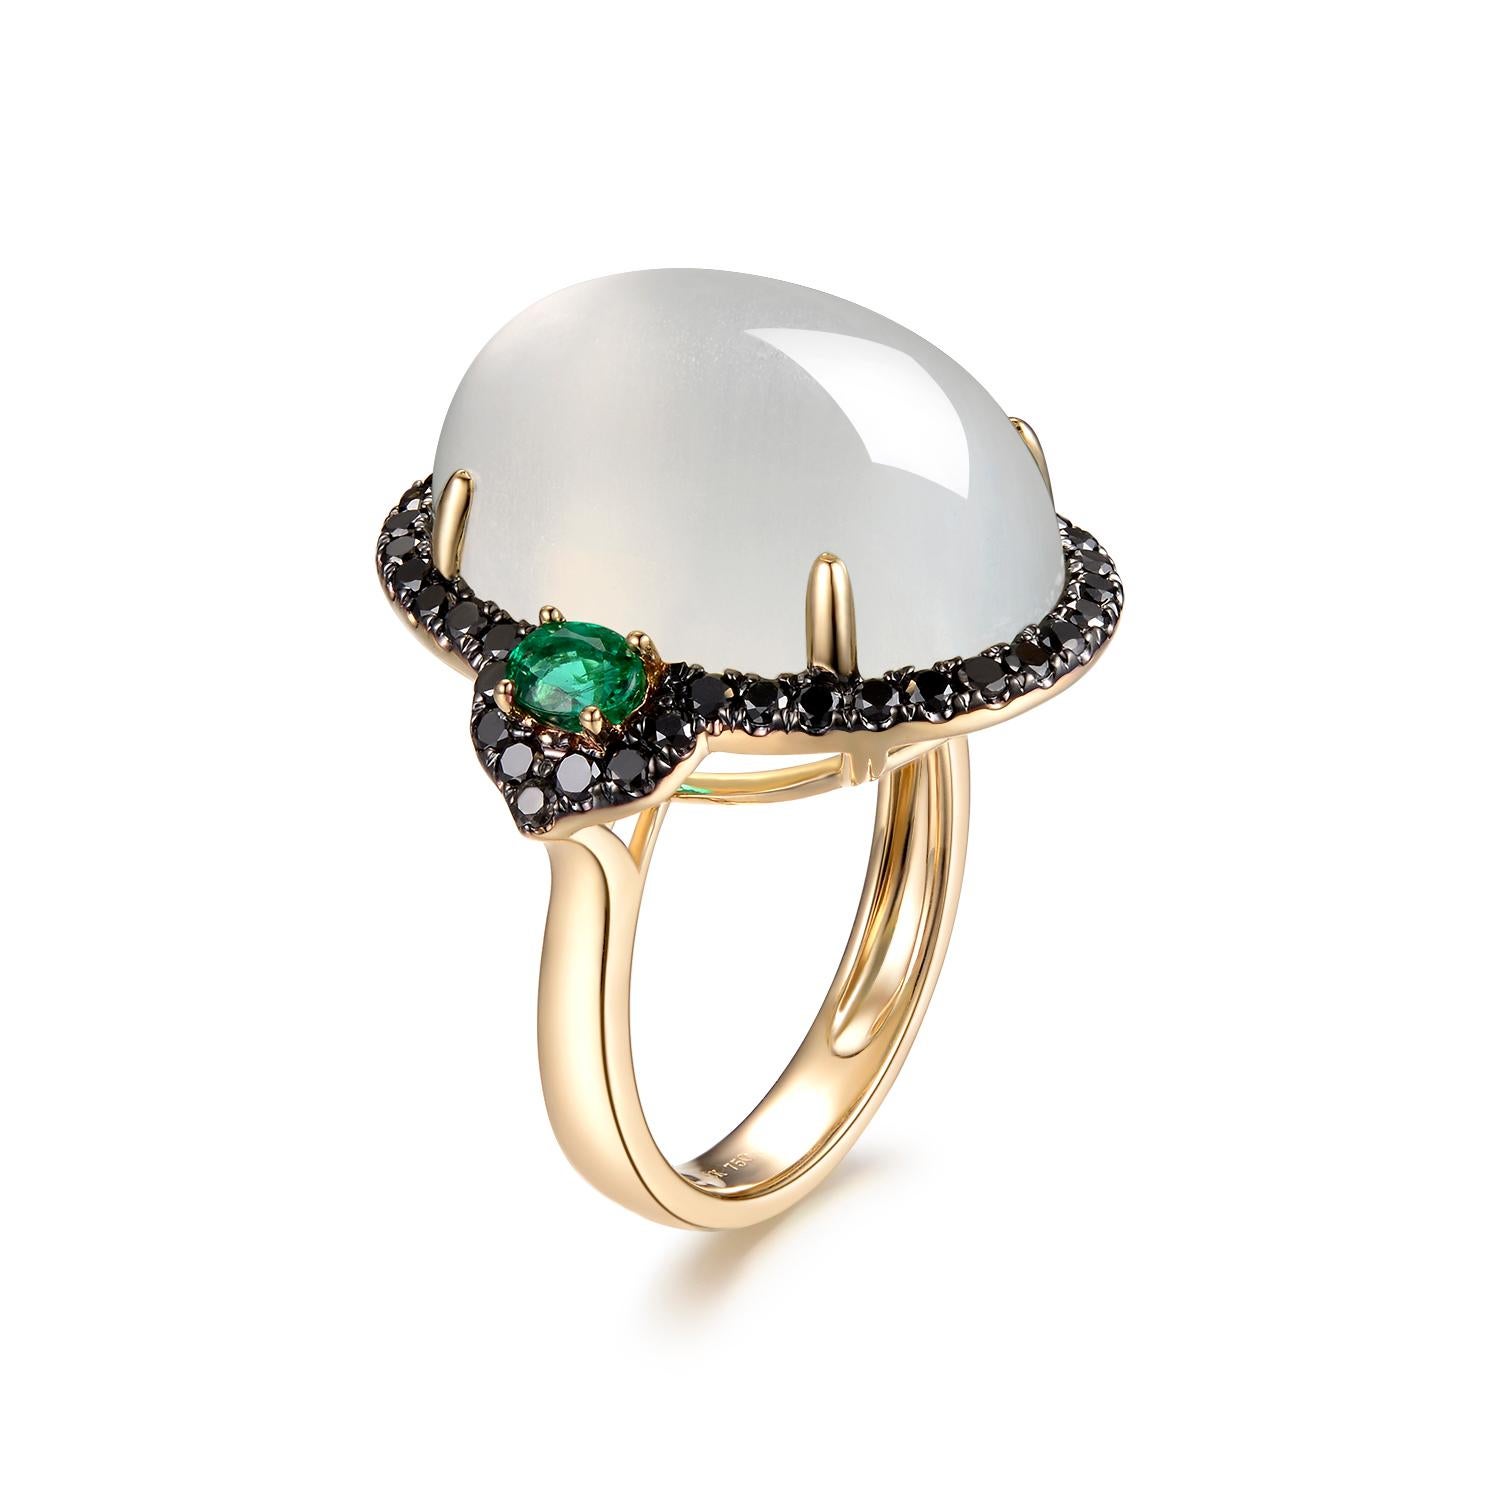 This pretty ring features a large oval moonstone weighing 24.39 carats with beautiful adularescence. . This moonstone is an impressive size, set in a dazzling black diamonds halo flanked with 2 emeralds 14k yellow gold design that showcases its